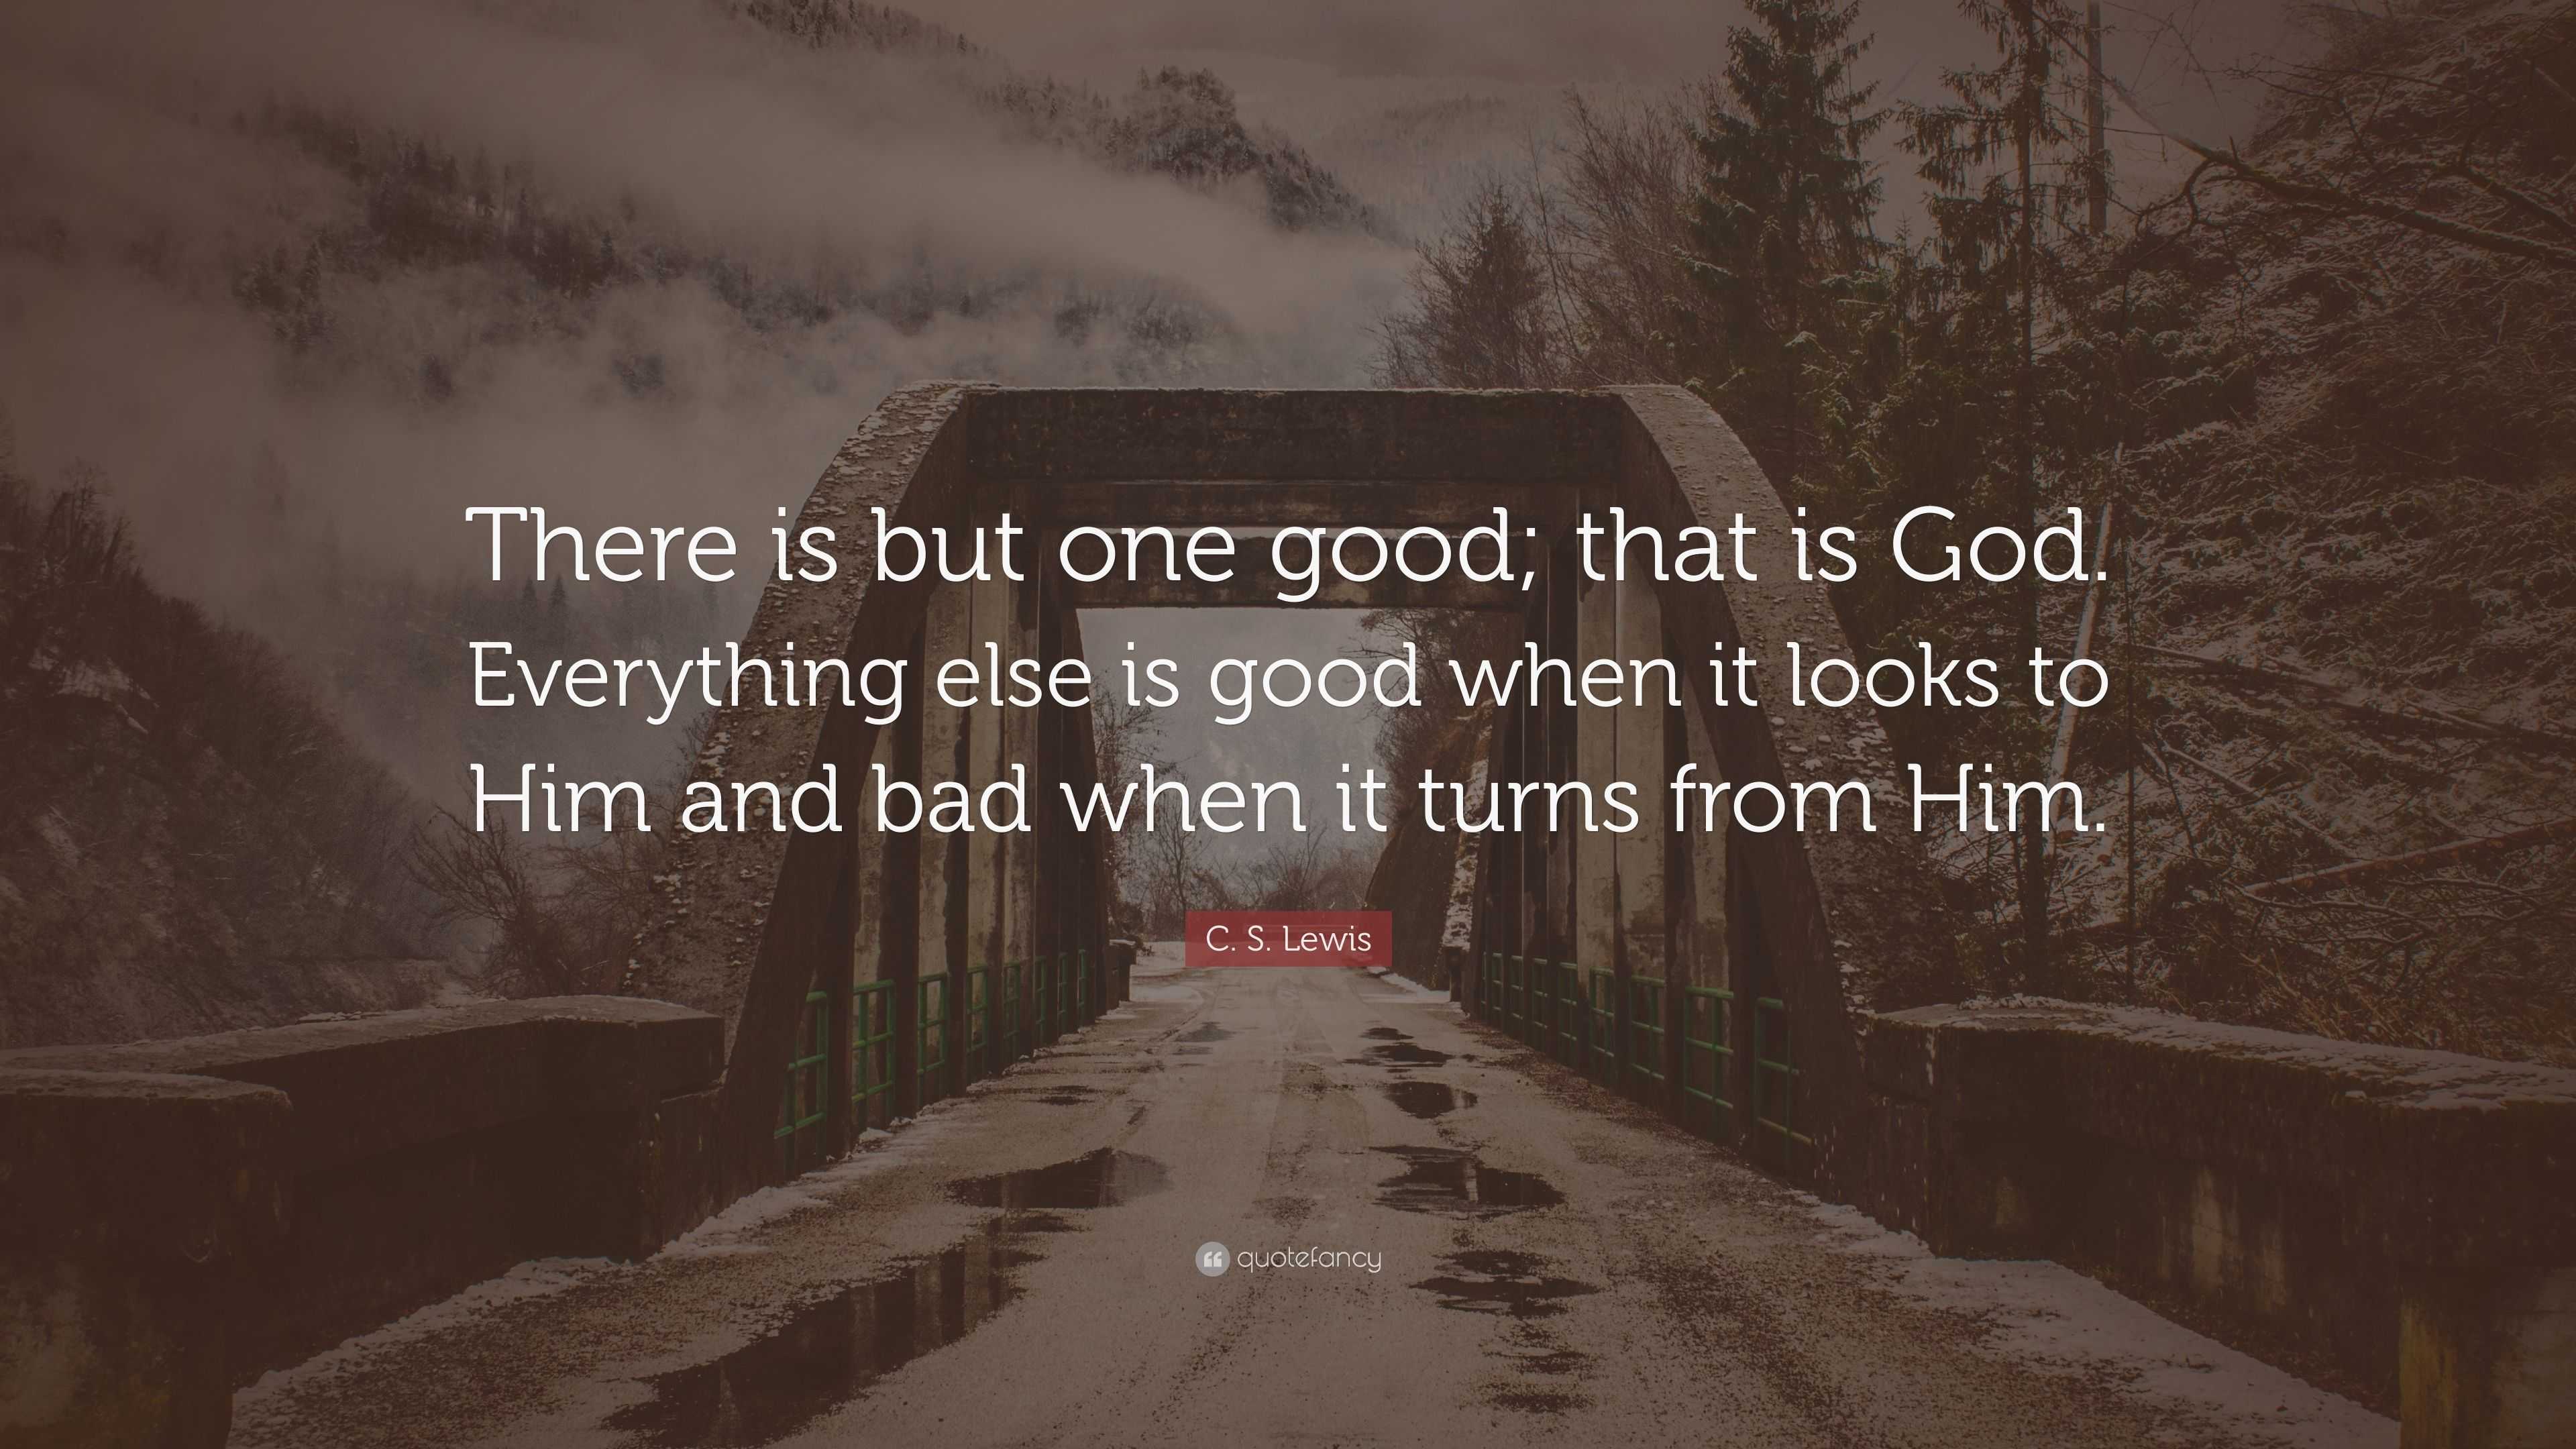 Everything else is good when it looks to Him and bad when it turns from Him. 